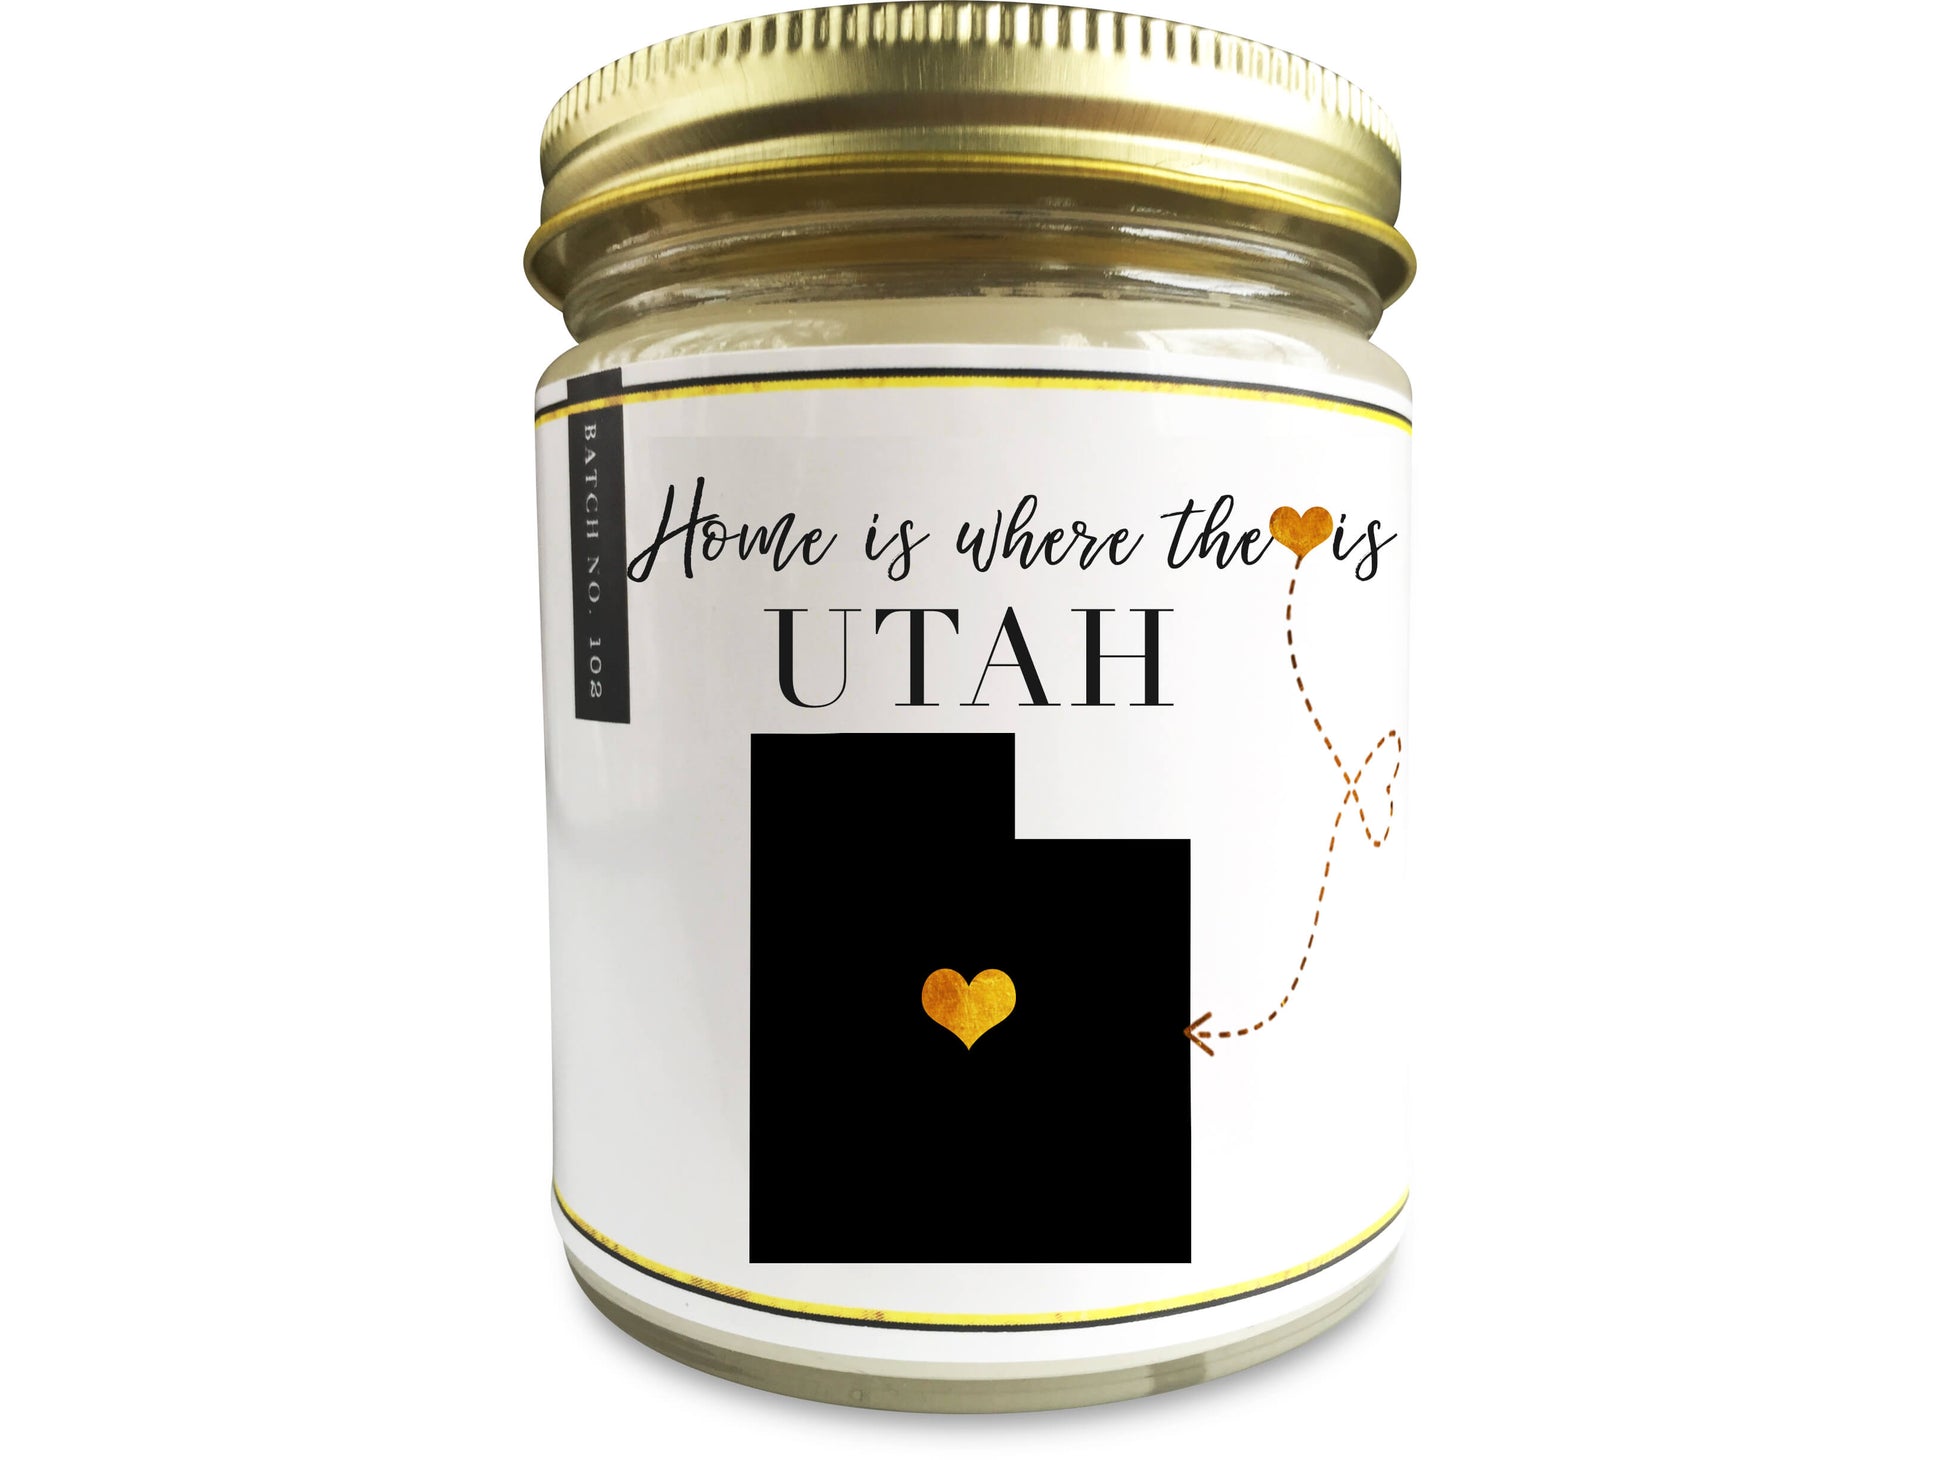 UTAH Homesick Candle - PenPal Candle Co ™ - Personalize Candle Greetings